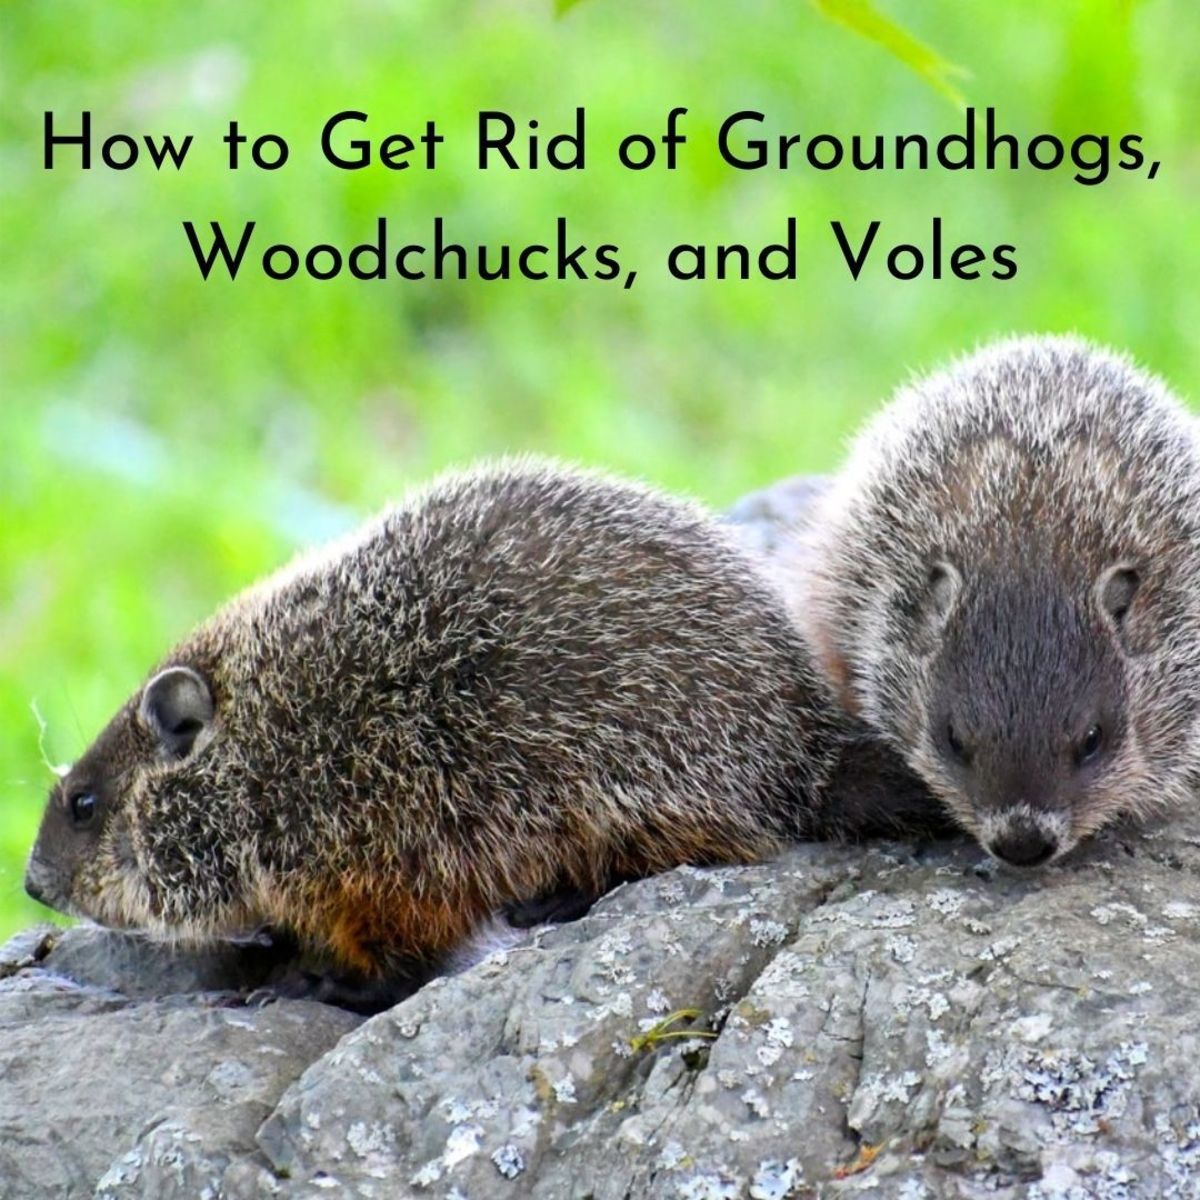 Groundhogs and woodchucks may look cuddly and cute...until one moves into your yard and starts eating all of your prized garden plants. 